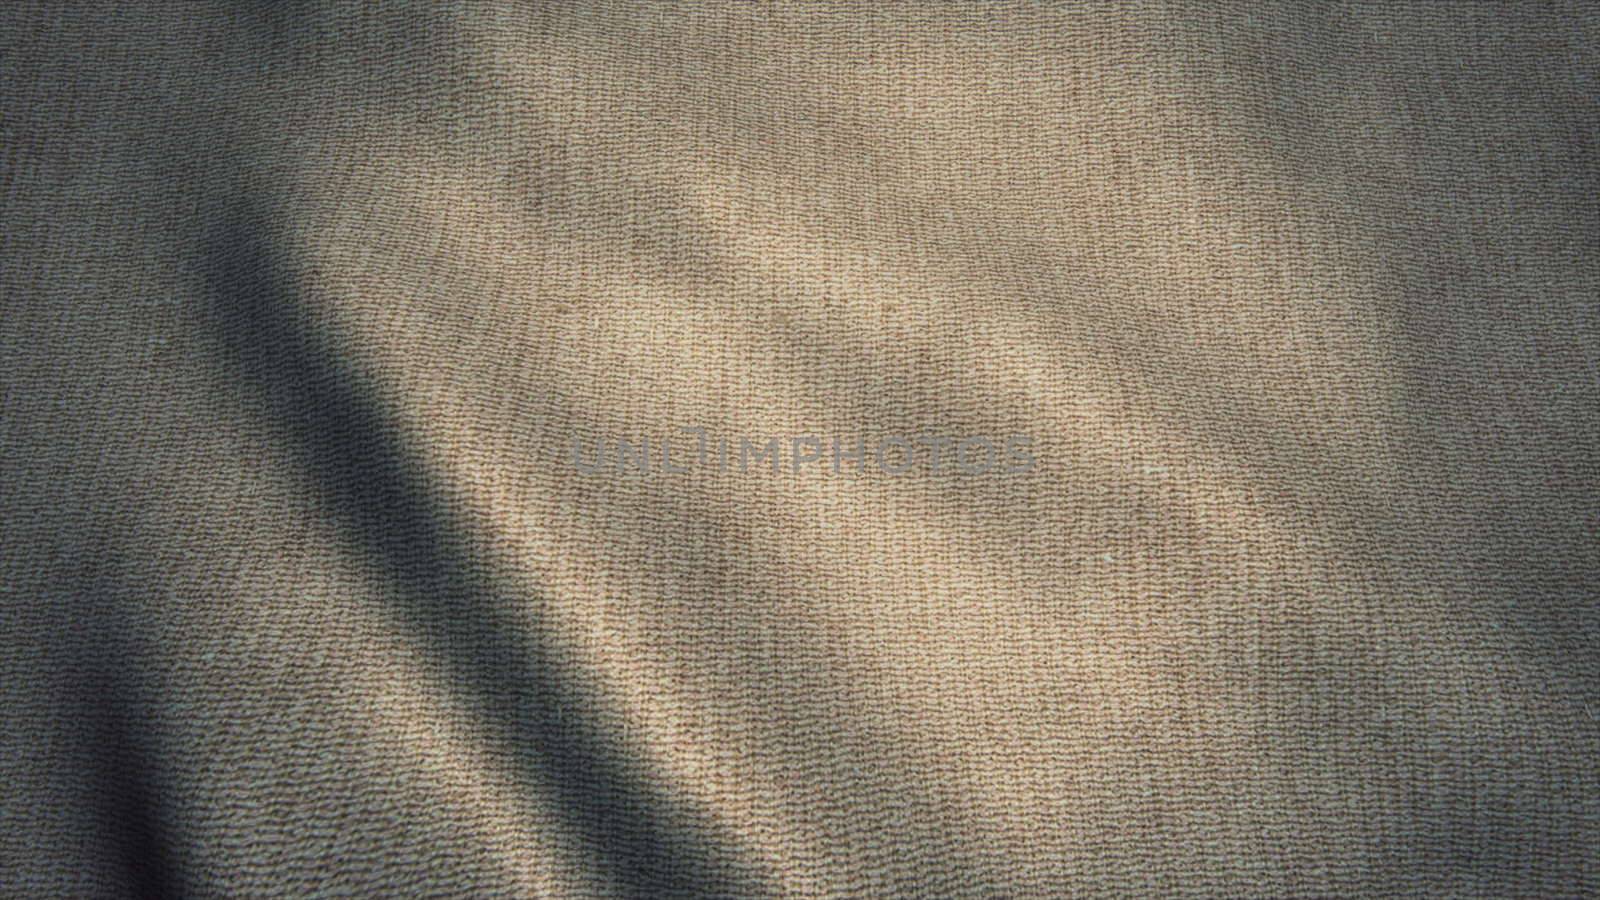 Highly detailed texture of burlap. Sackcloth by nolimit046